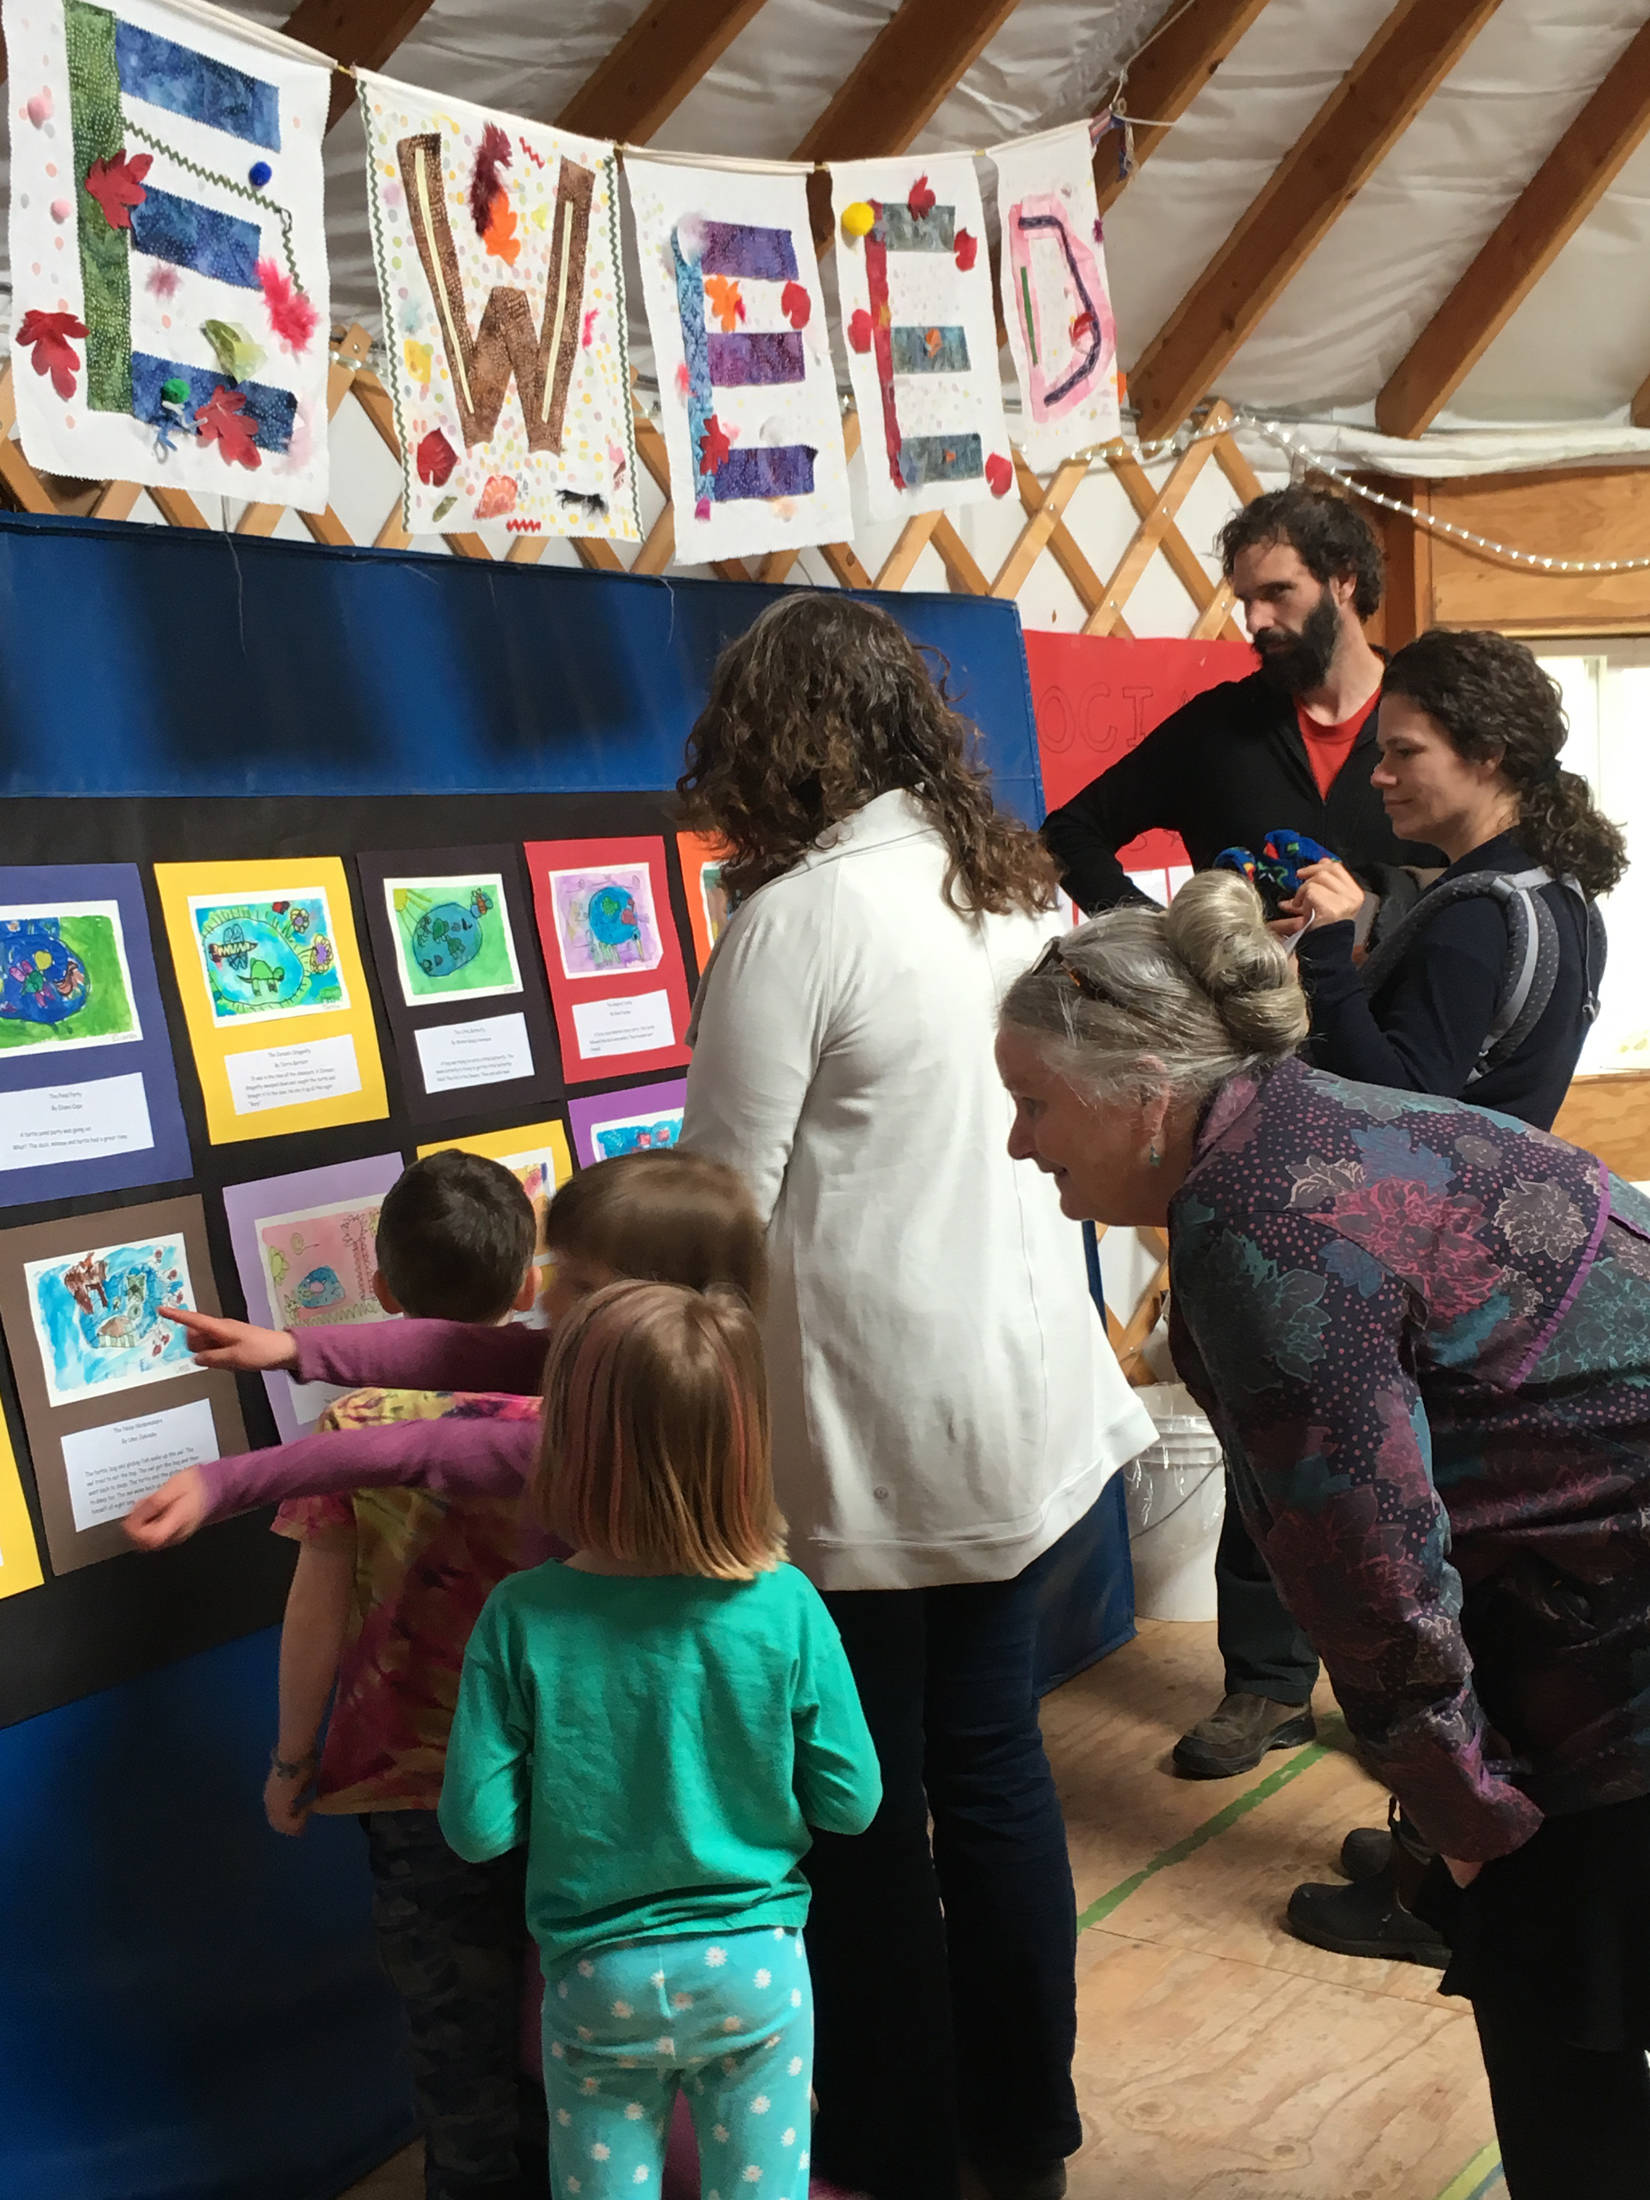 Students and family members review art students made during a residency by Debbie Piper, during an art showing Friday, March 29, 2019 at Little Fireweed Academy in Homer, Alaska. (Photo courtesy Adele Person)